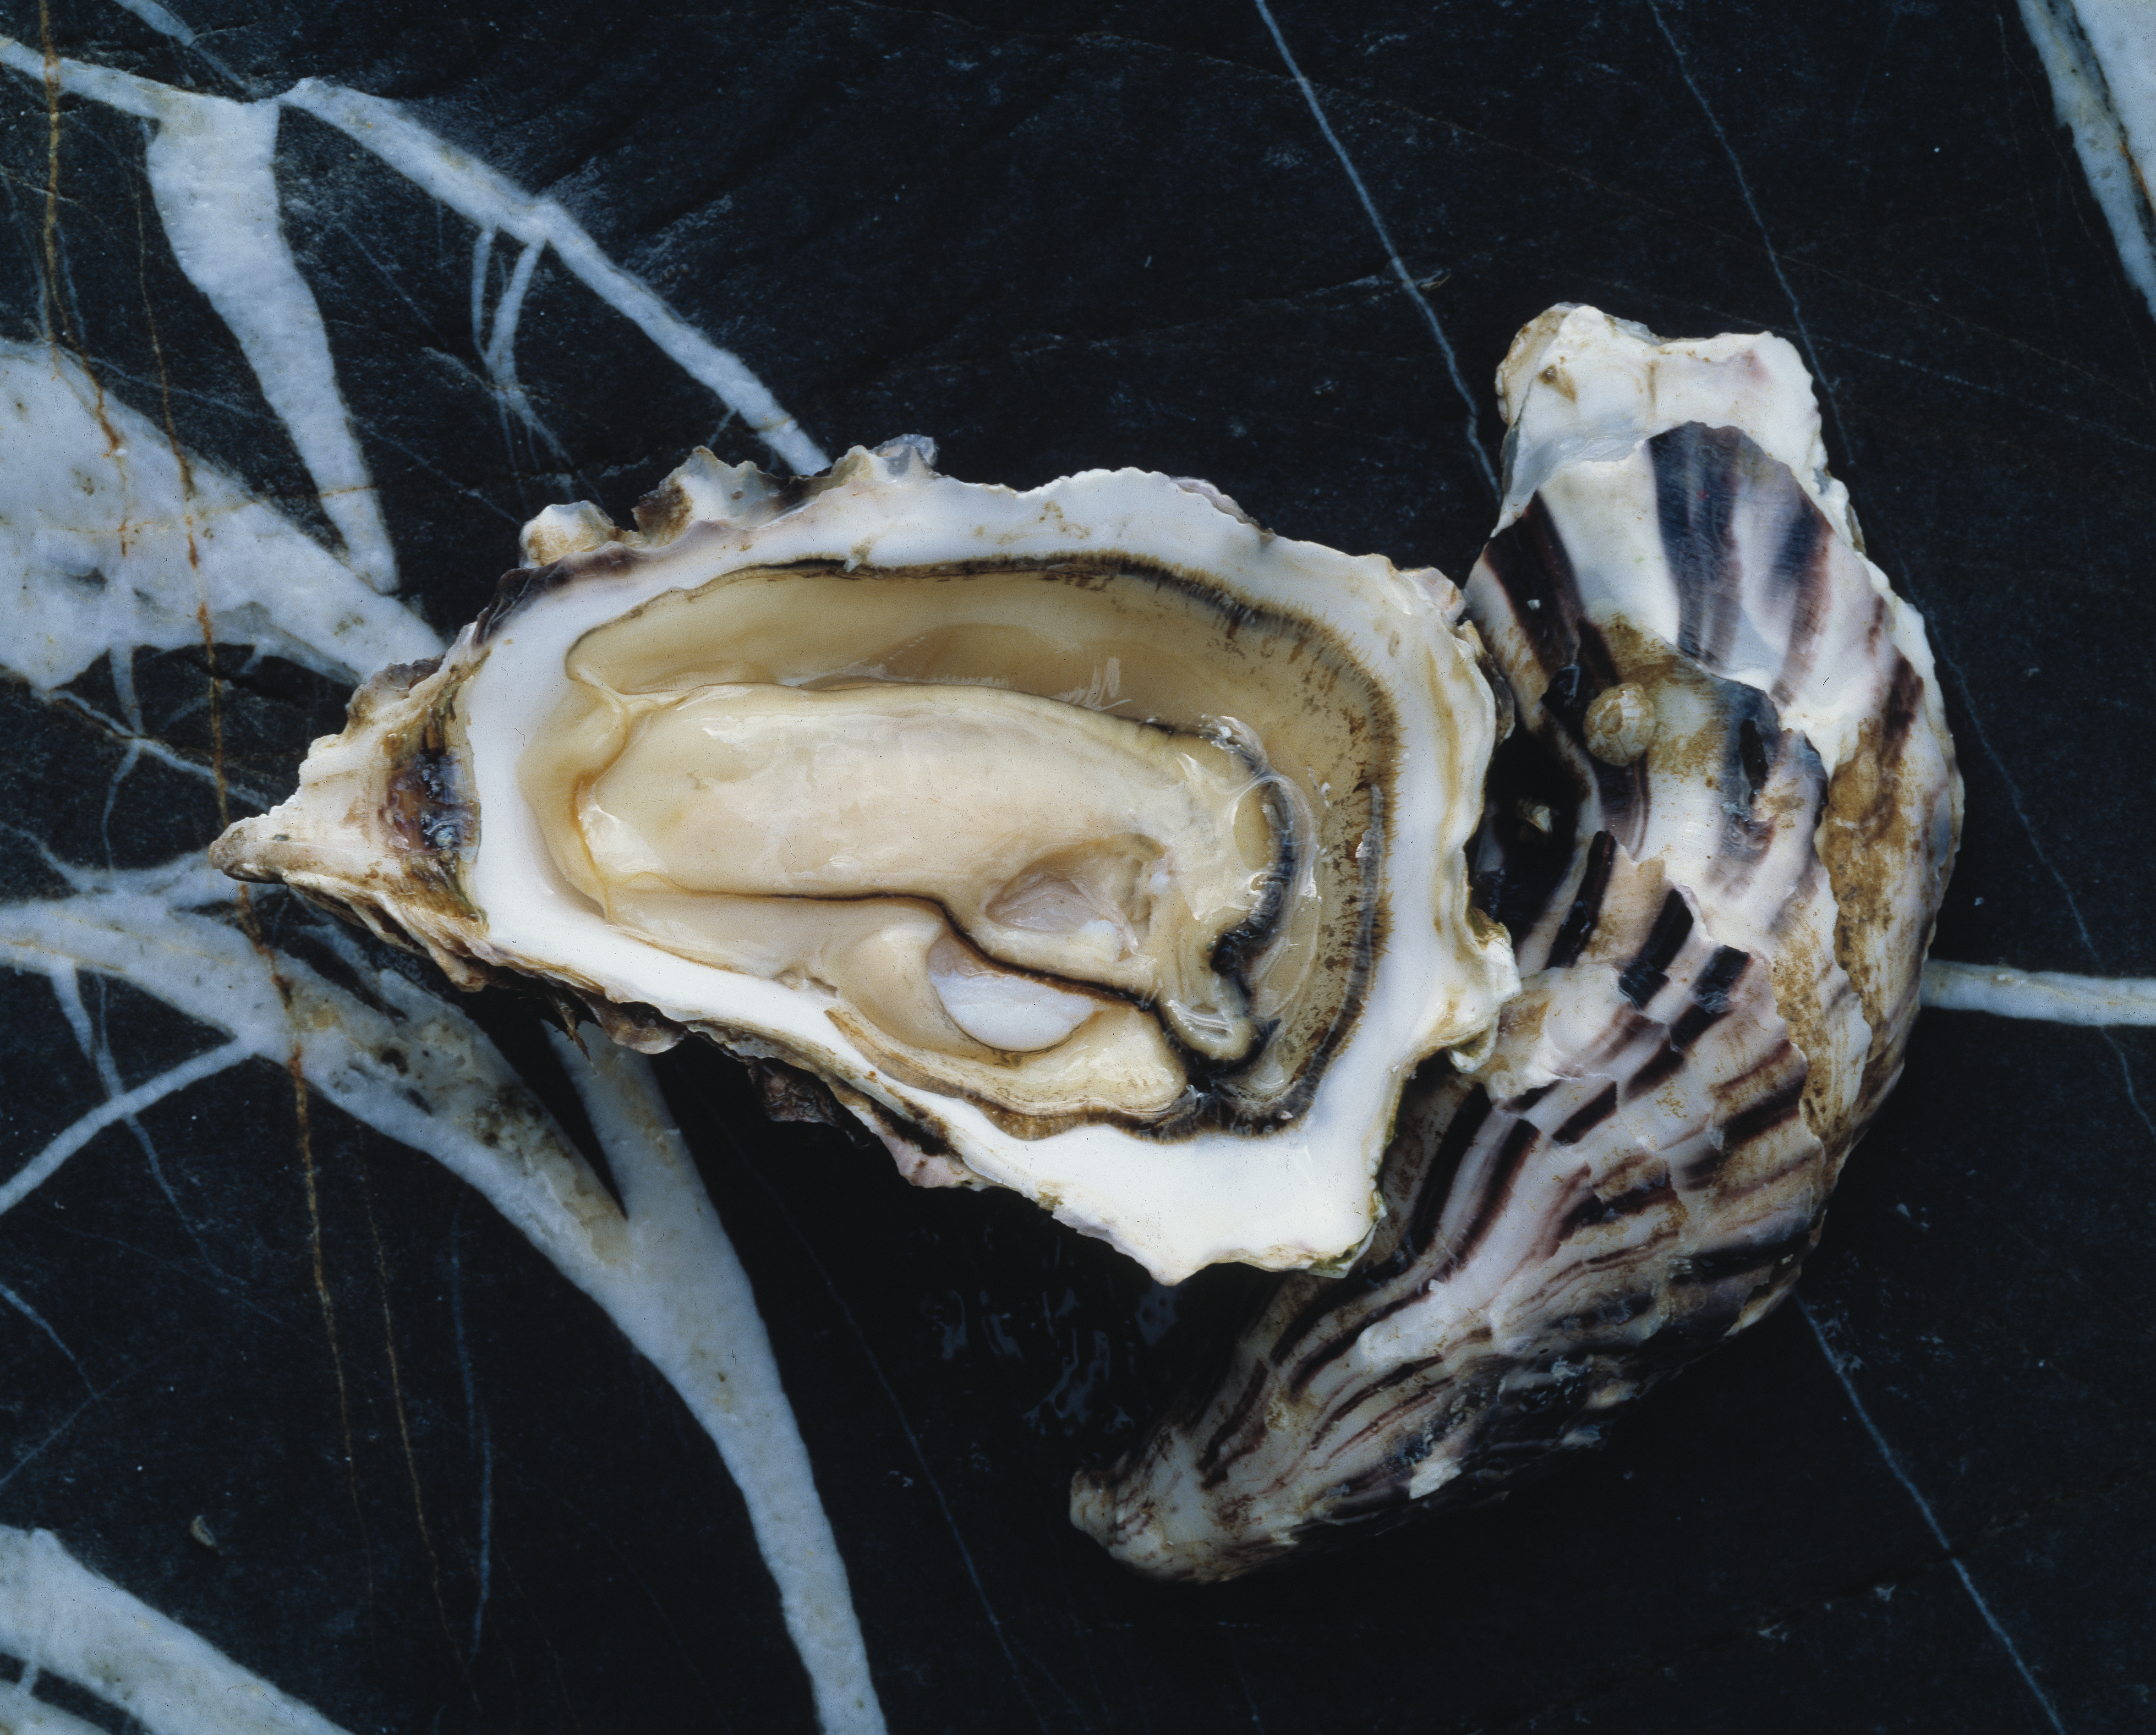 Food and drink special: An opened oyster on a black and white marble surface